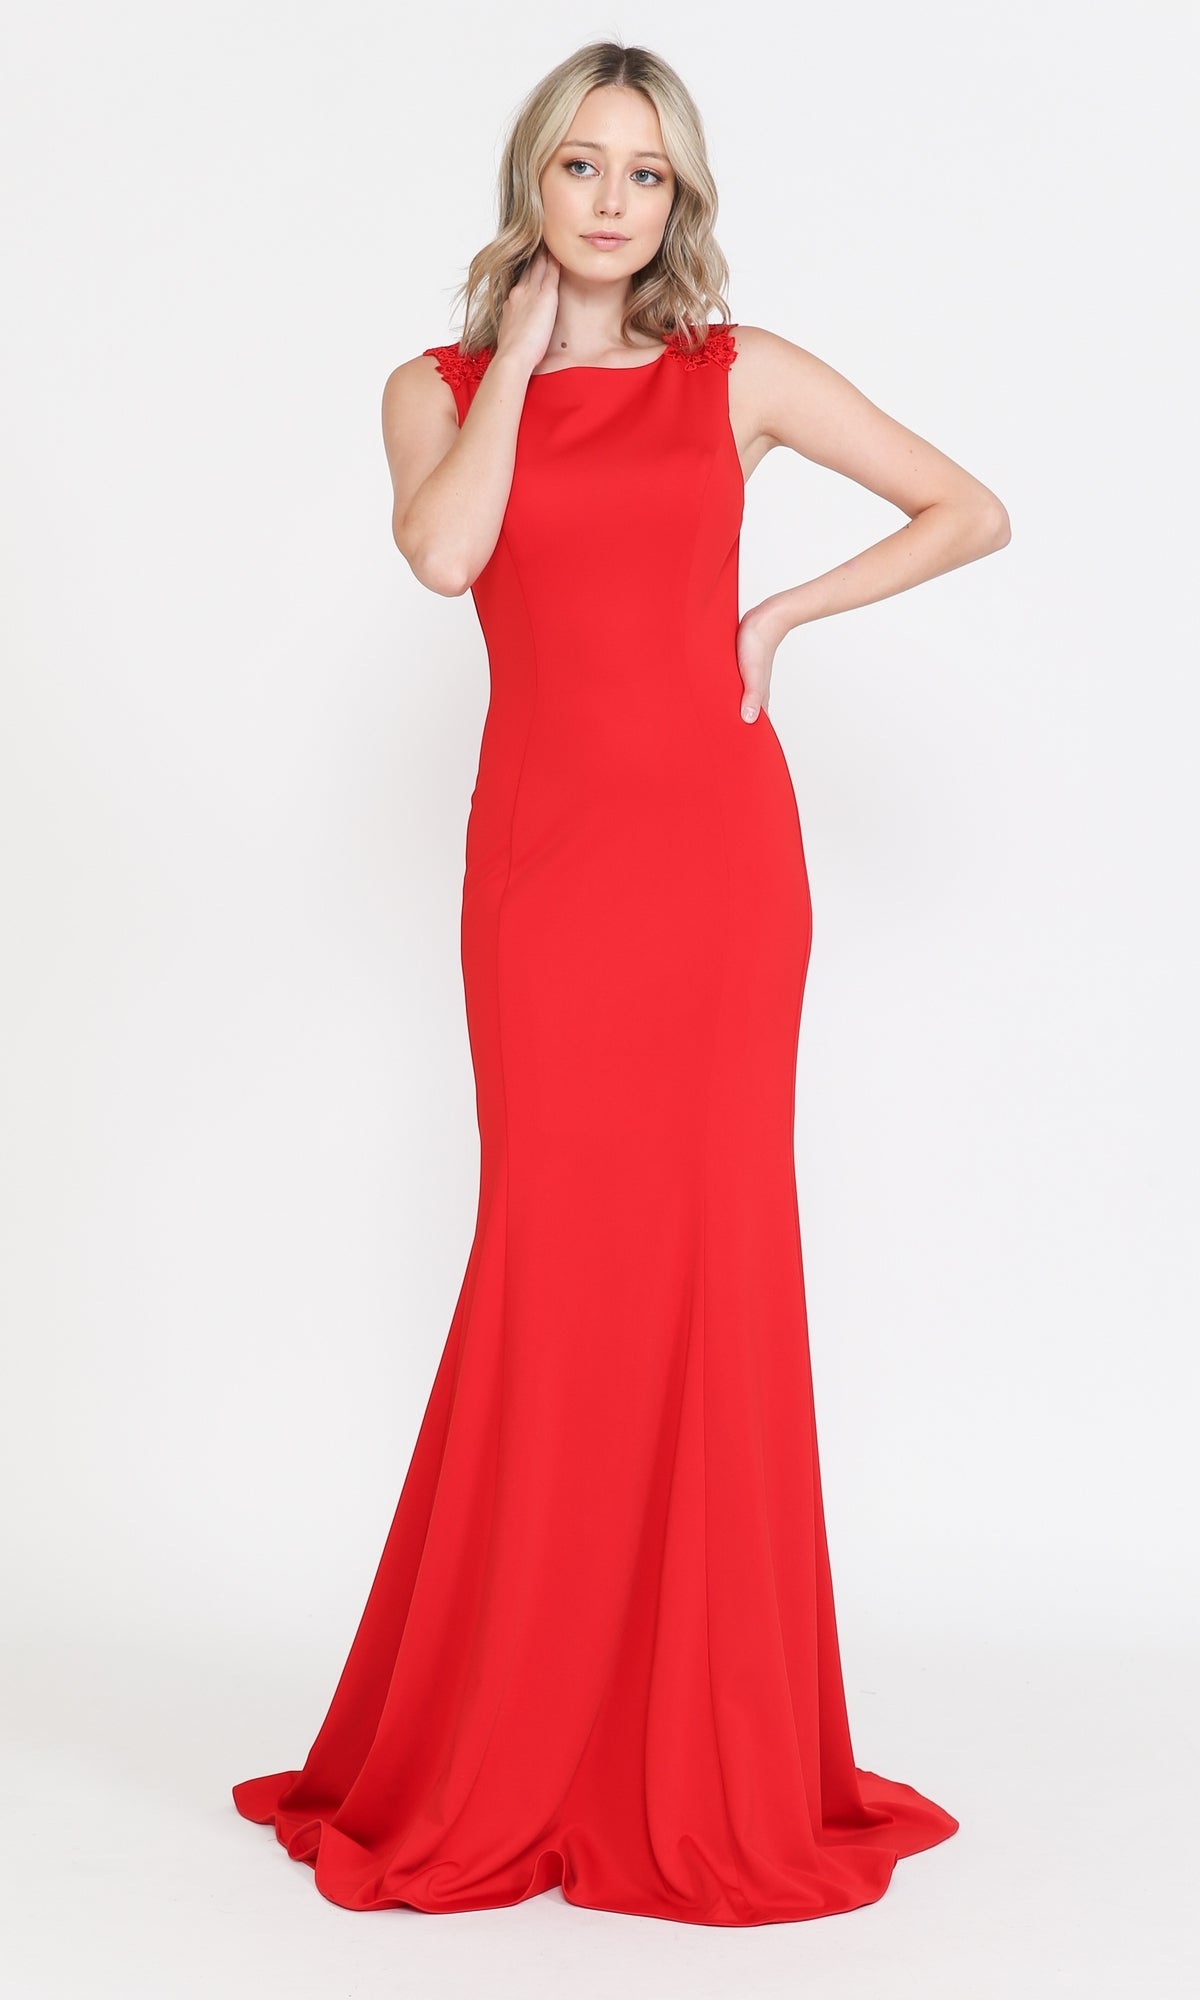 High-Neck Simple Long Jersey Prom Dress 8566